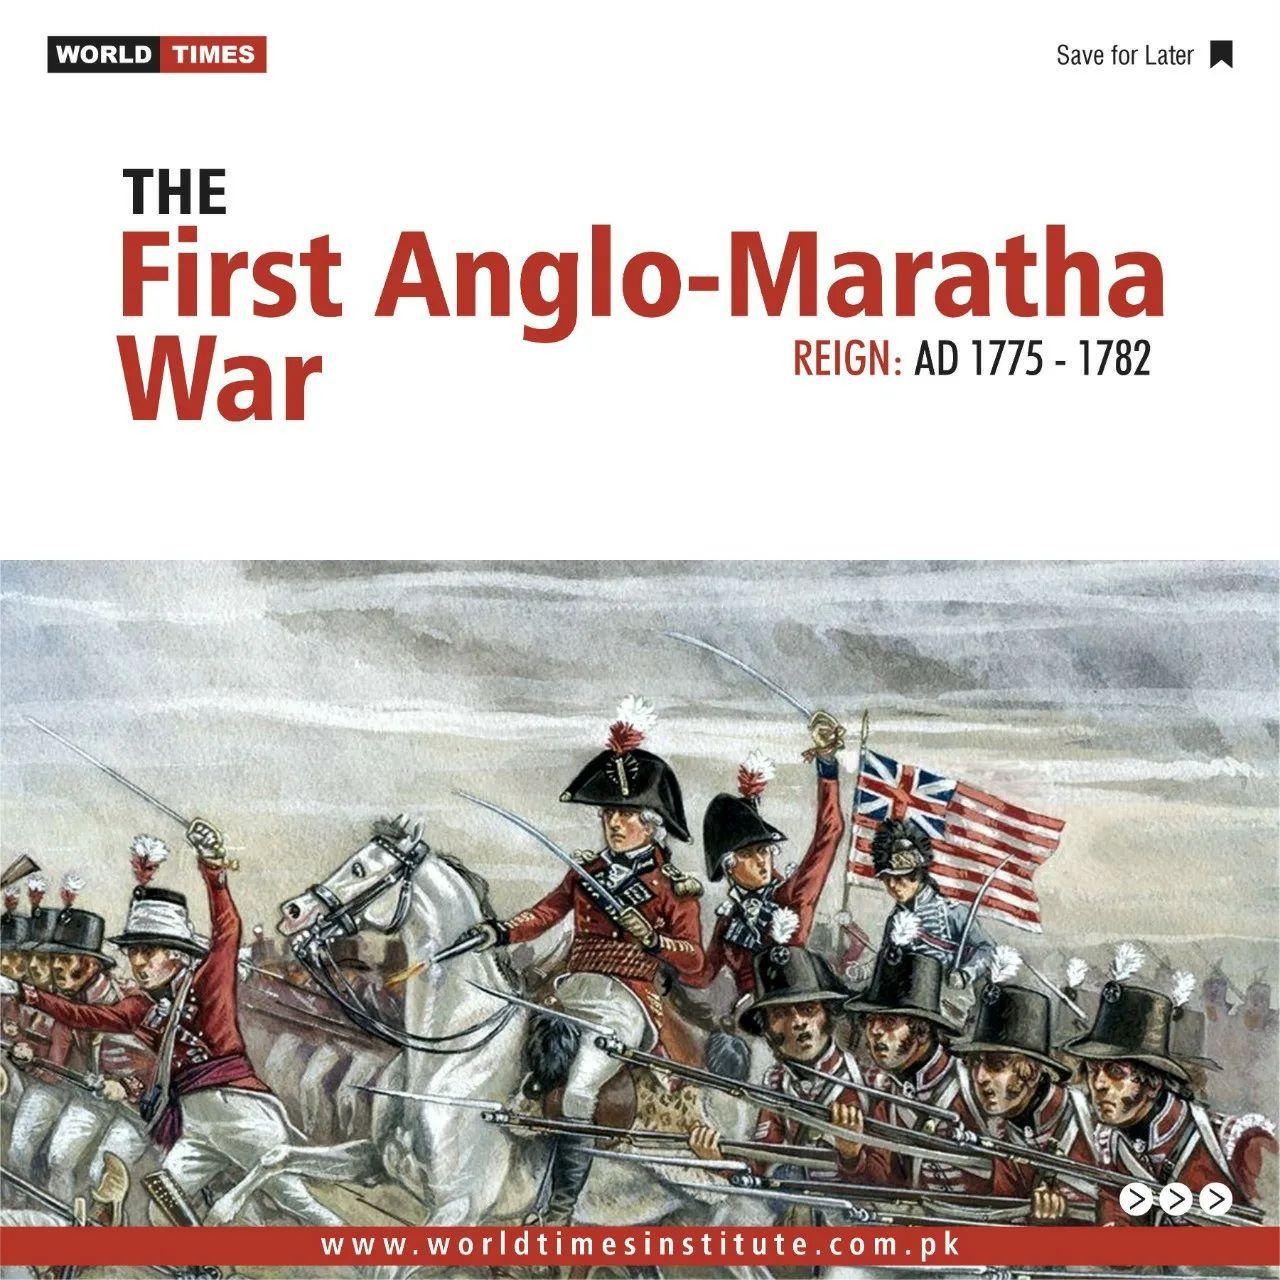 You are currently viewing The First Anglo-Maratha War (Reign AD 1775-1782)